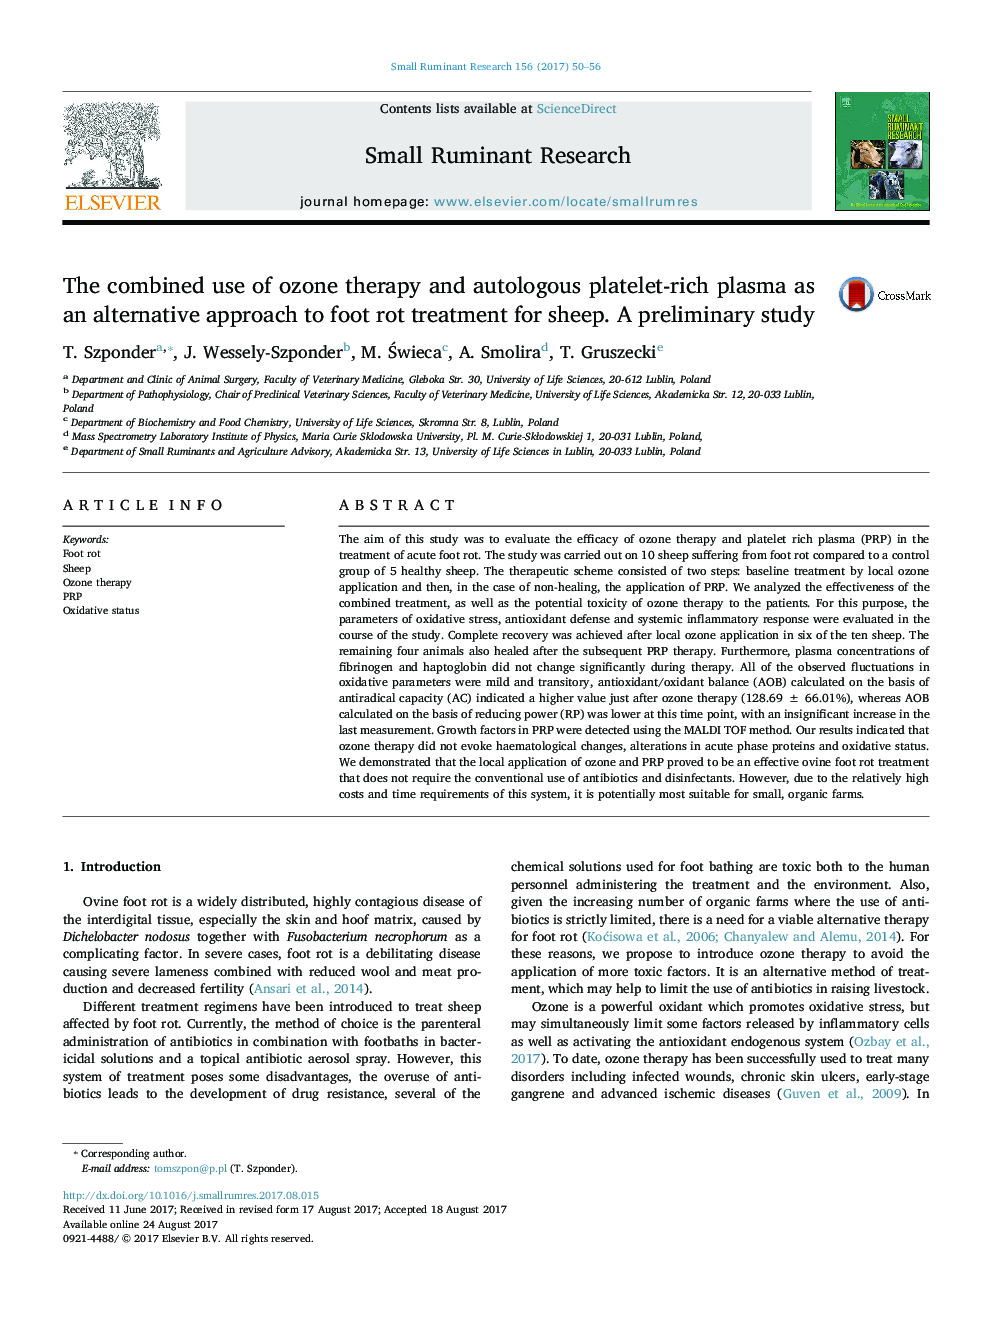 The combined use of ozone therapy and autologous platelet-rich plasma as an alternative approach to foot rot treatment for sheep. A preliminary study